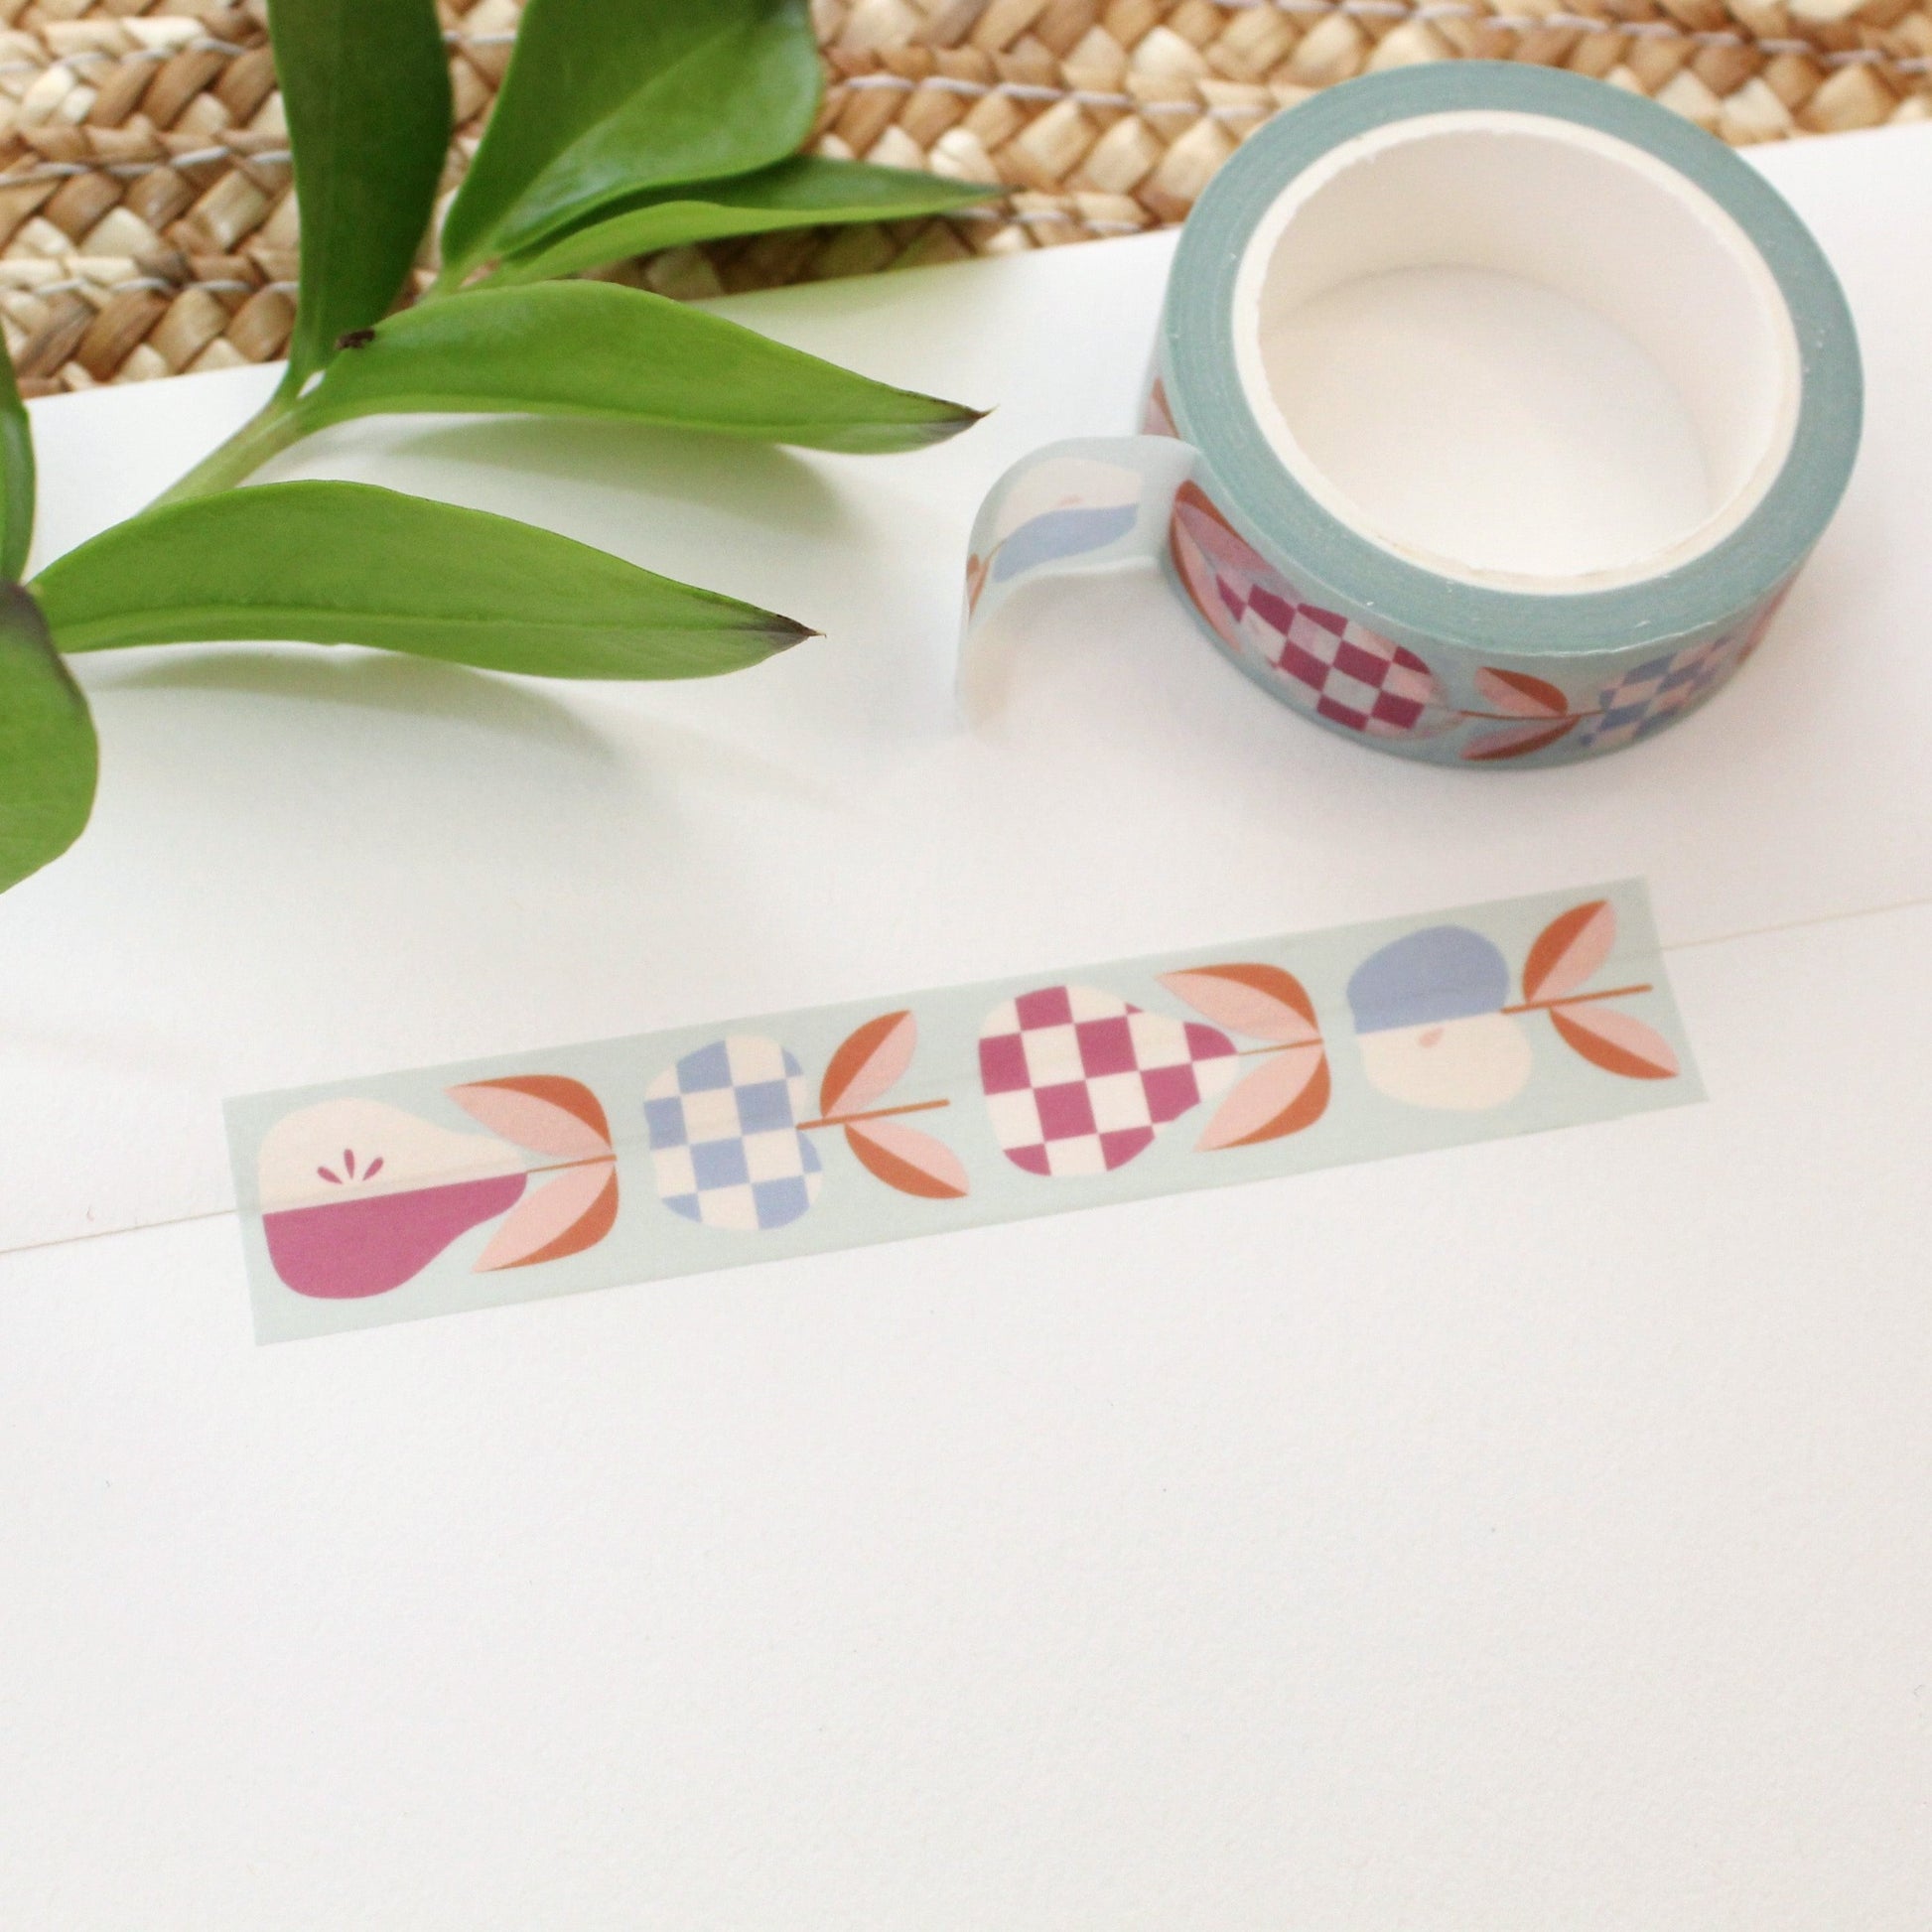 purple and blue apples and pears on washi tapes. featuring fun checks and a light blue background.